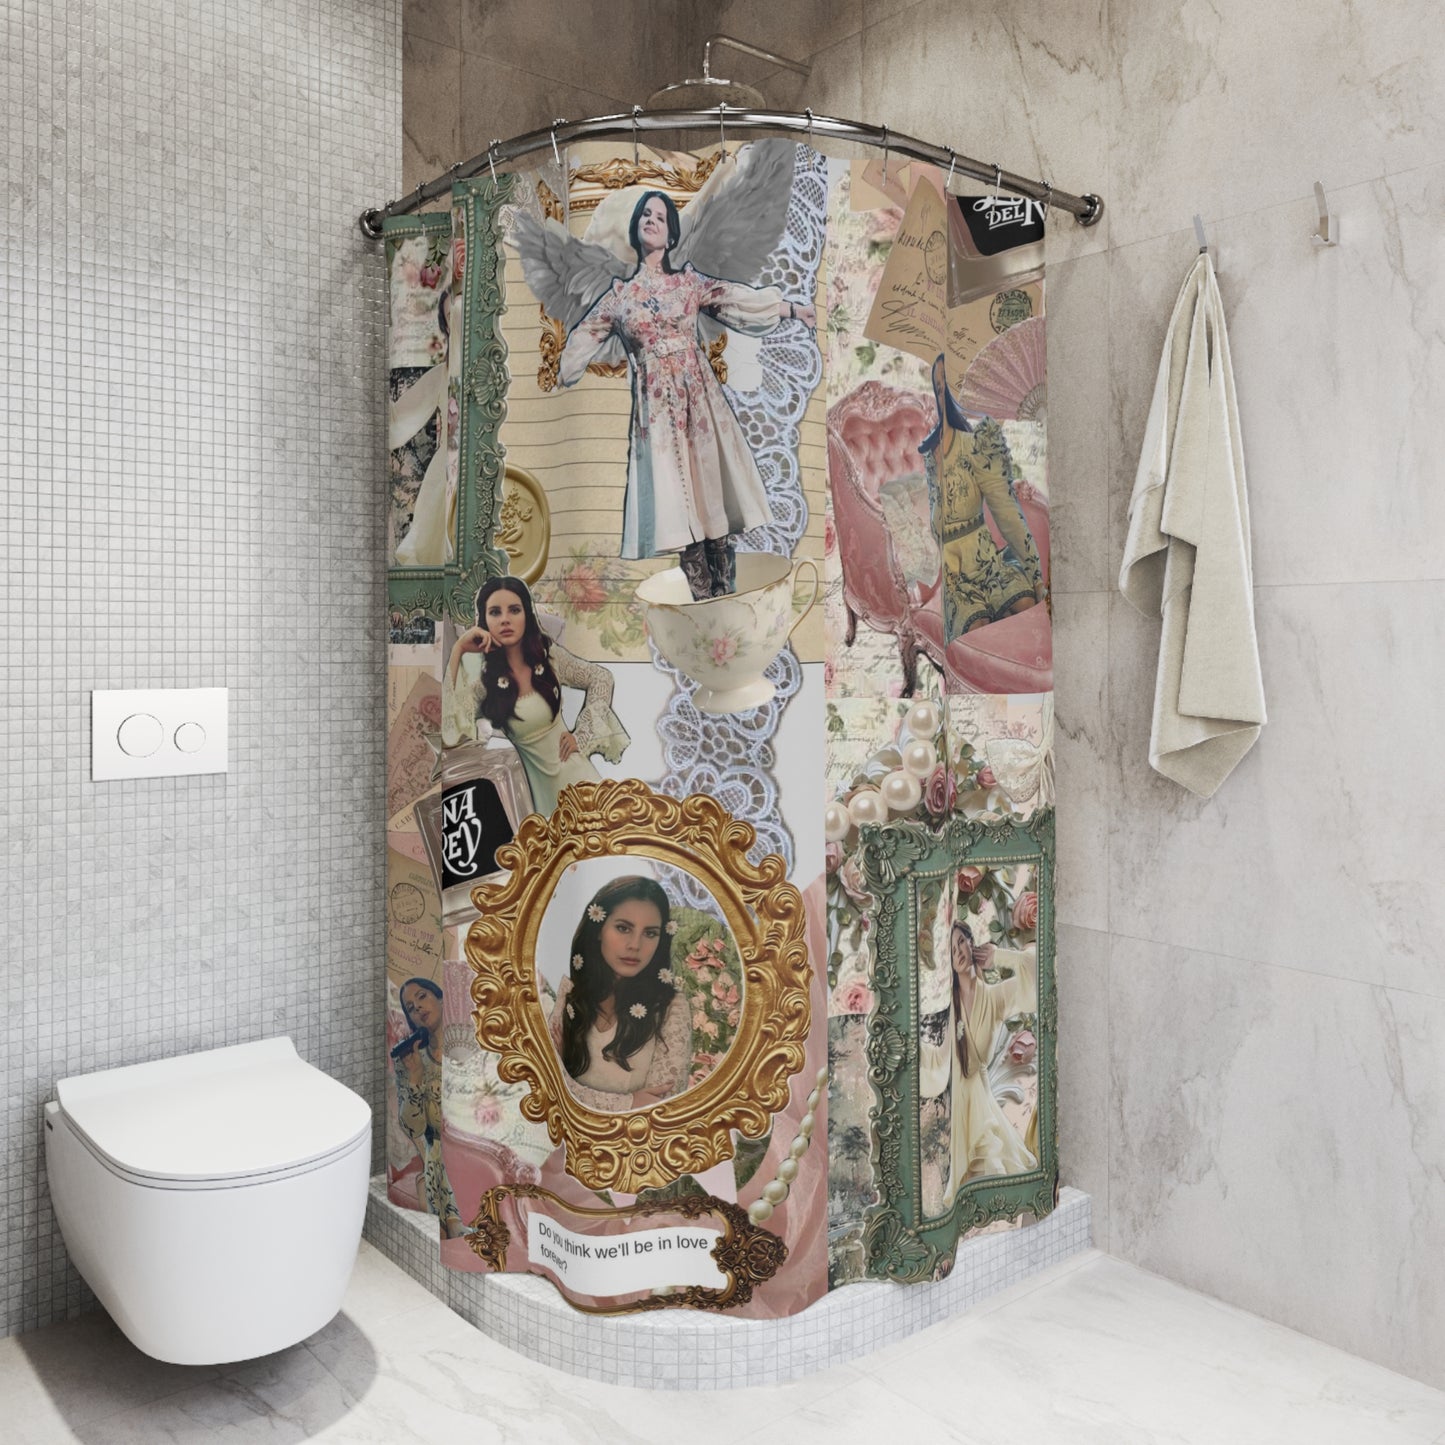 Lana Del Rey Victorian Collage Polyester Shower Curtain